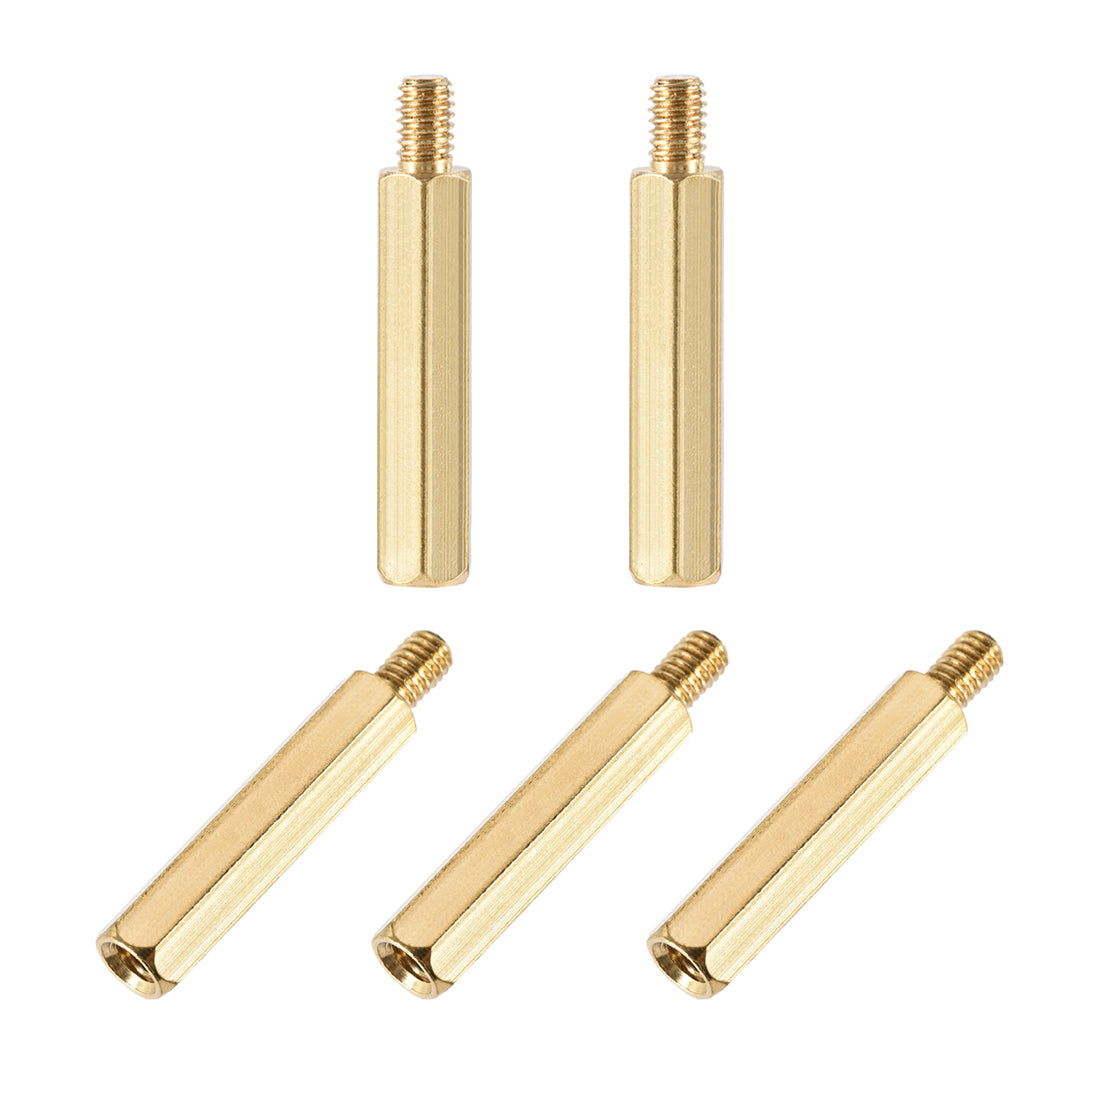 Uxcell Uxcell M4 x 30 mm + 6 mm Male to Female Hex Brass Spacer Standoff 5pcs